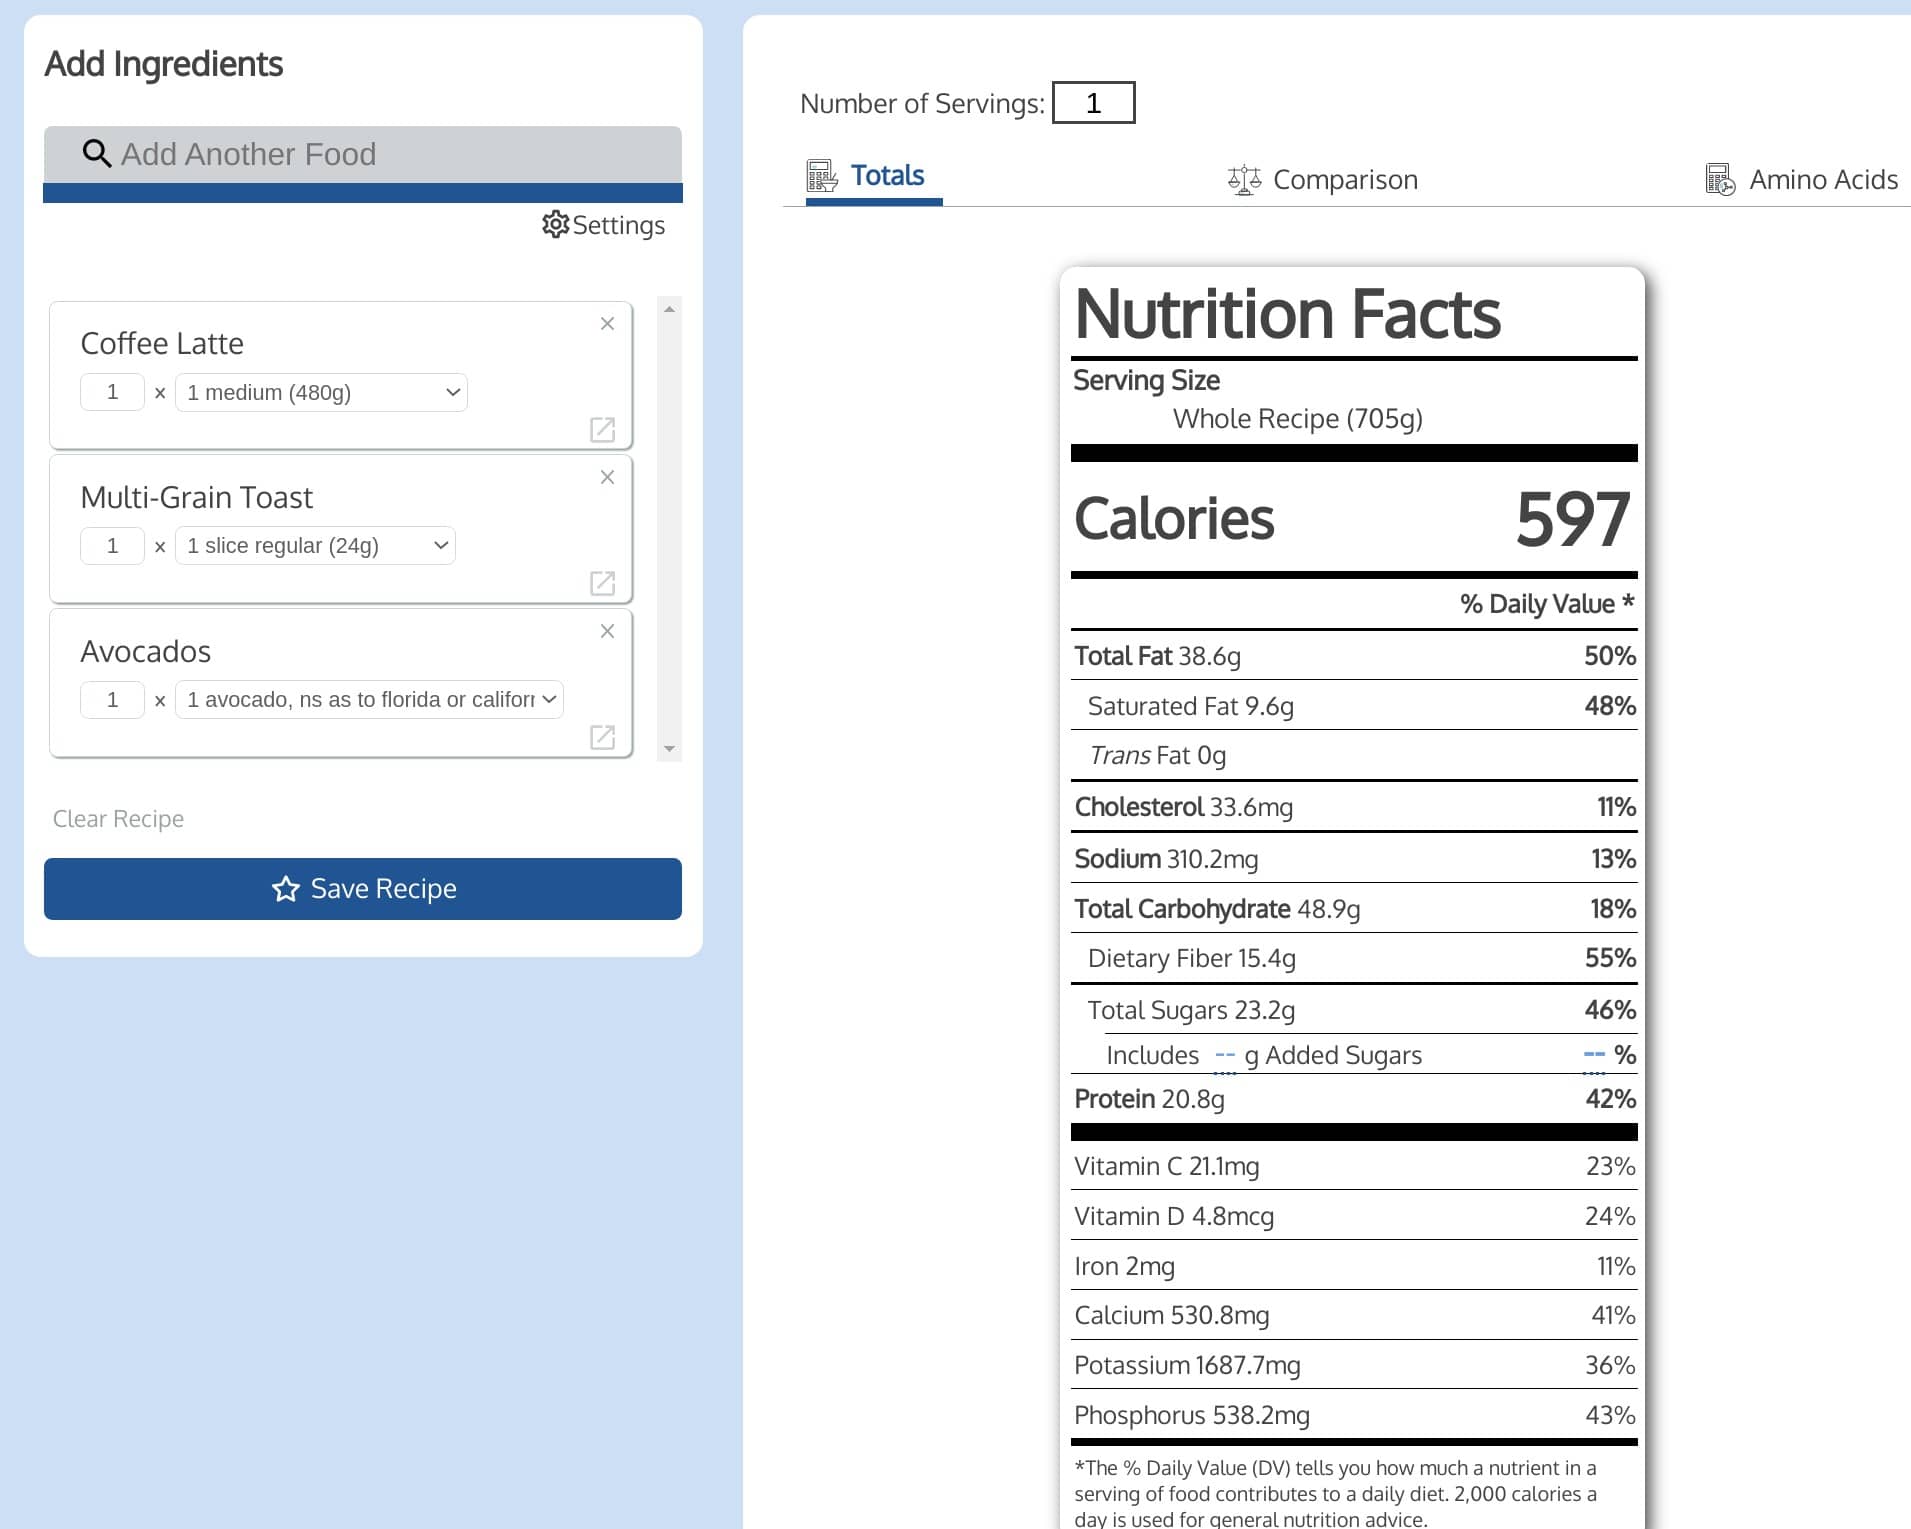 My Food Data - Free Nutrition Tools to Understand What You Eat